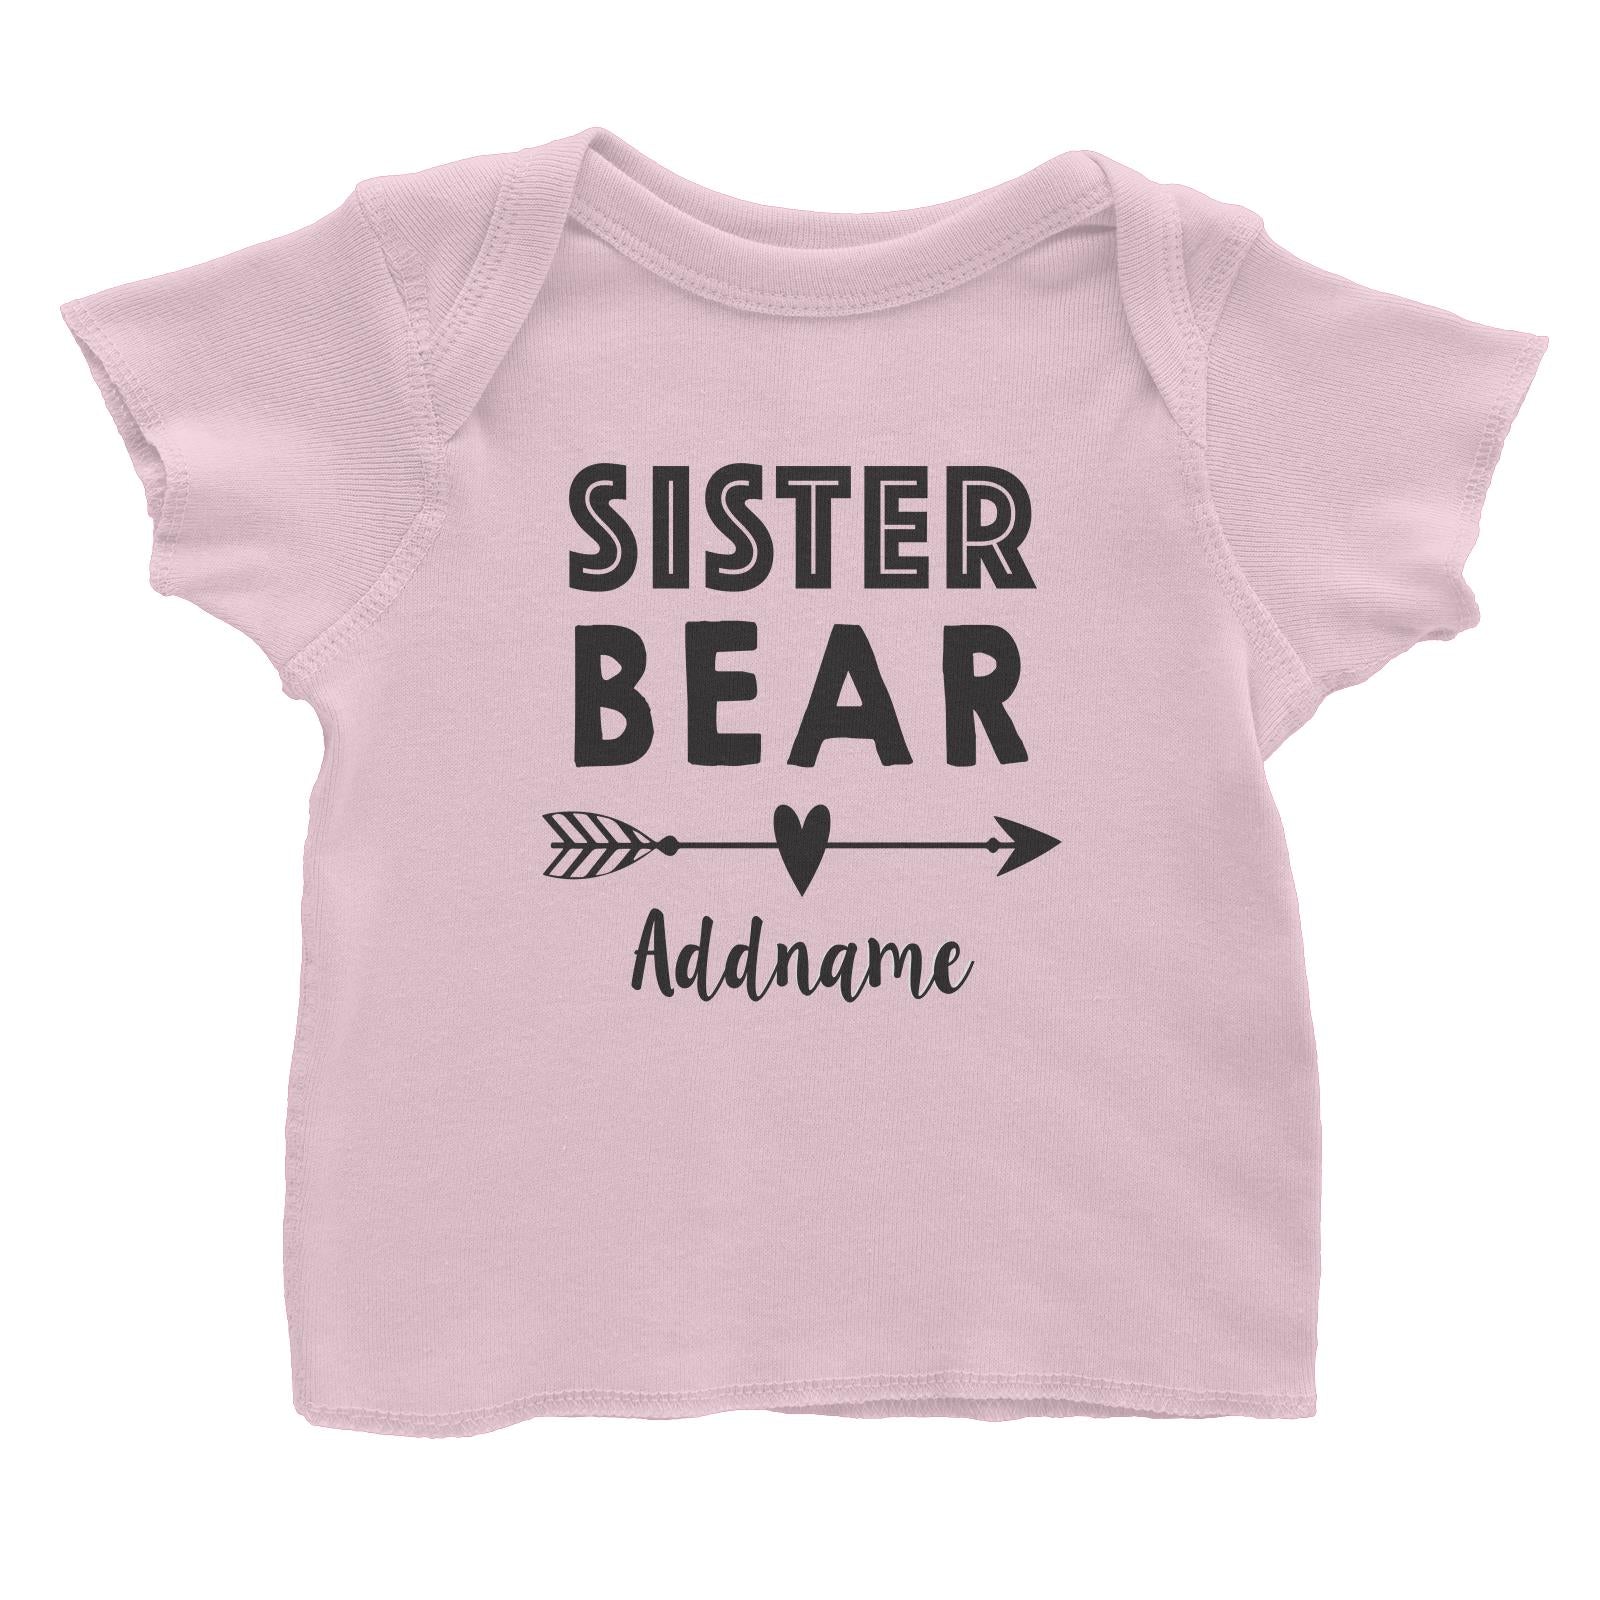 Sister Bear Addname Baby T-Shirt  Matching Family Personalizable Designs